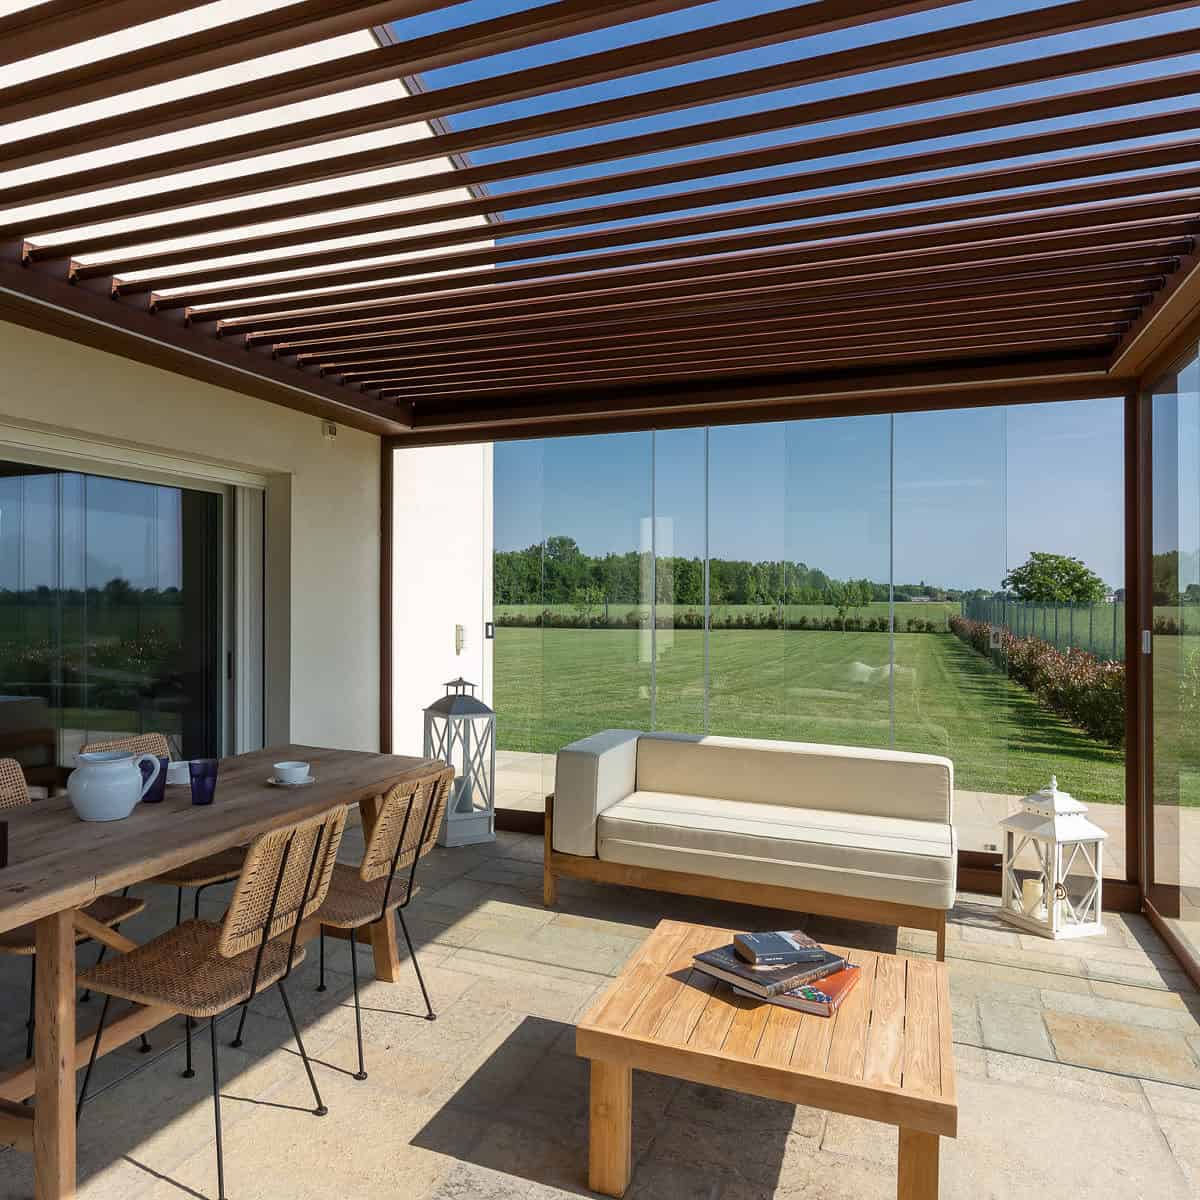 This image showcases the inside view of a Kedry Prime louvred roof pergola in brown, equipped with rotating louvres and glass sliding doors. With the louvres adjusted to a partially open position, natural light fills the space while still providing shade and shelter from the elements. The glass sliding doors offer a seamless connection between the indoor and outdoor areas, making it a perfect space for entertaining, dining, or simply relaxing. The versatile and stylish design of the Kedry Prime louvred roof pergola makes it a valuable addition to any home, providing an attractive and functional outdoor living space that can be used year-round.